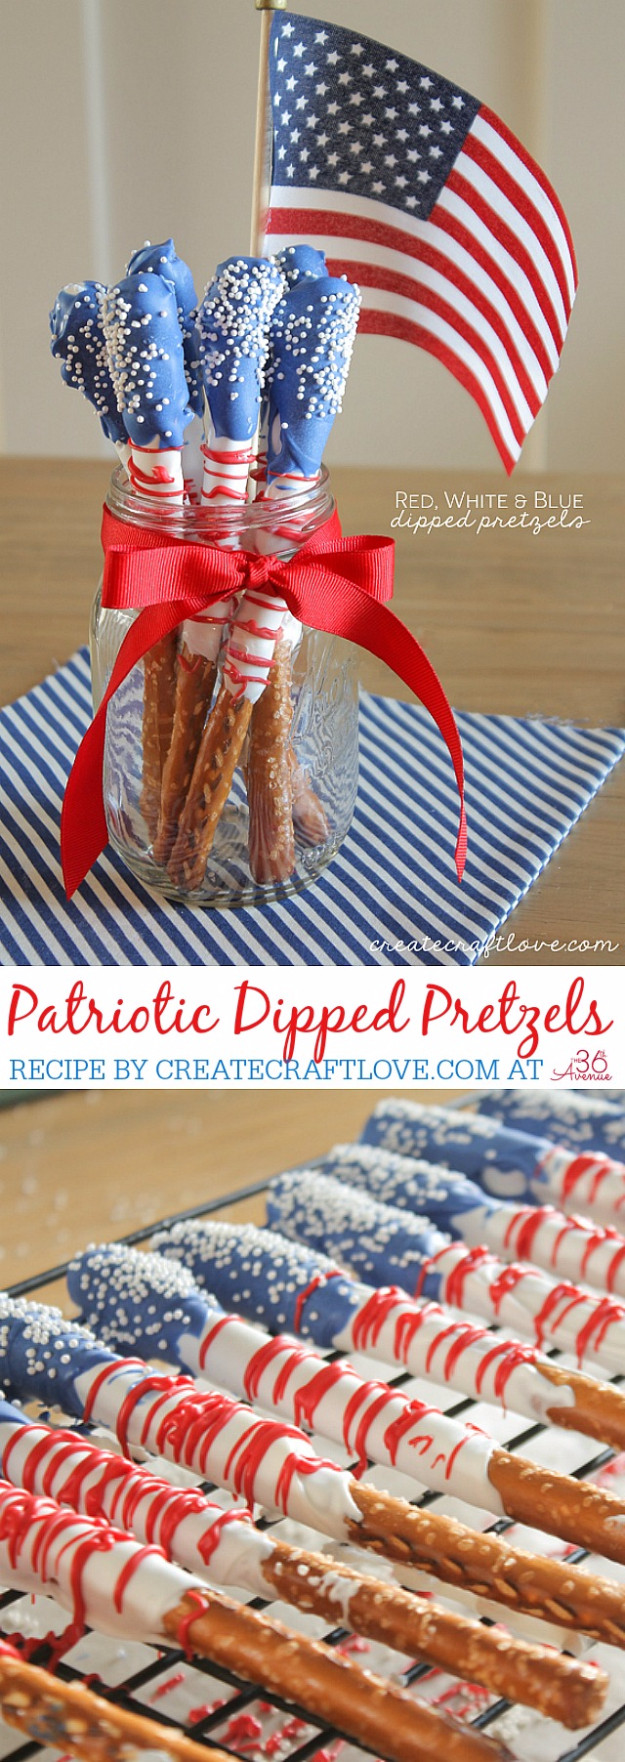 4th Of July Party Recipes
 35 Awesome 4th of July Party Ideas